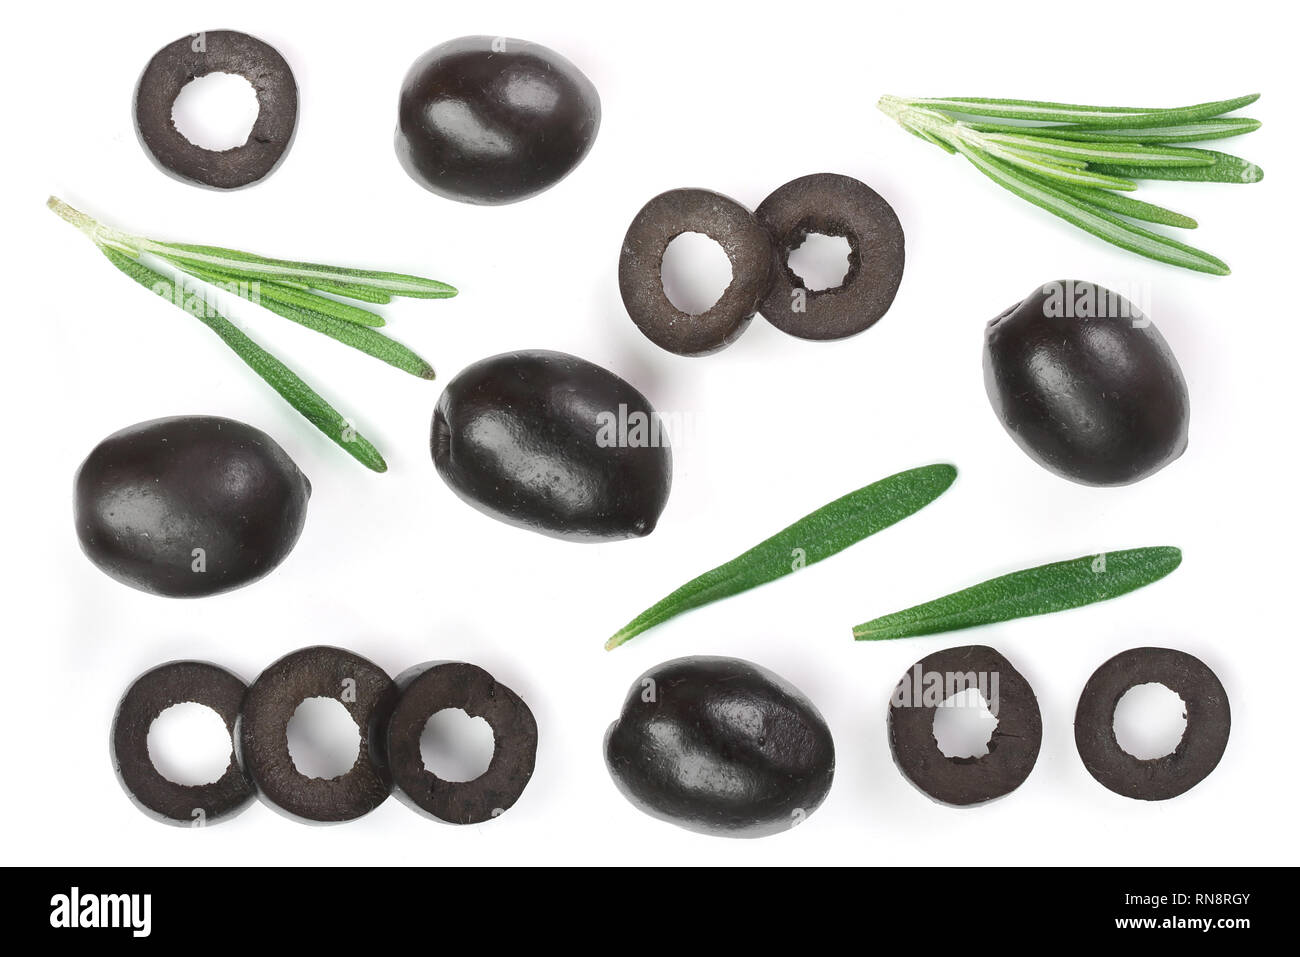 whole and sliced black olives with rosemary leaves isolated on white background. Top view. Flat lay pattern Stock Photo